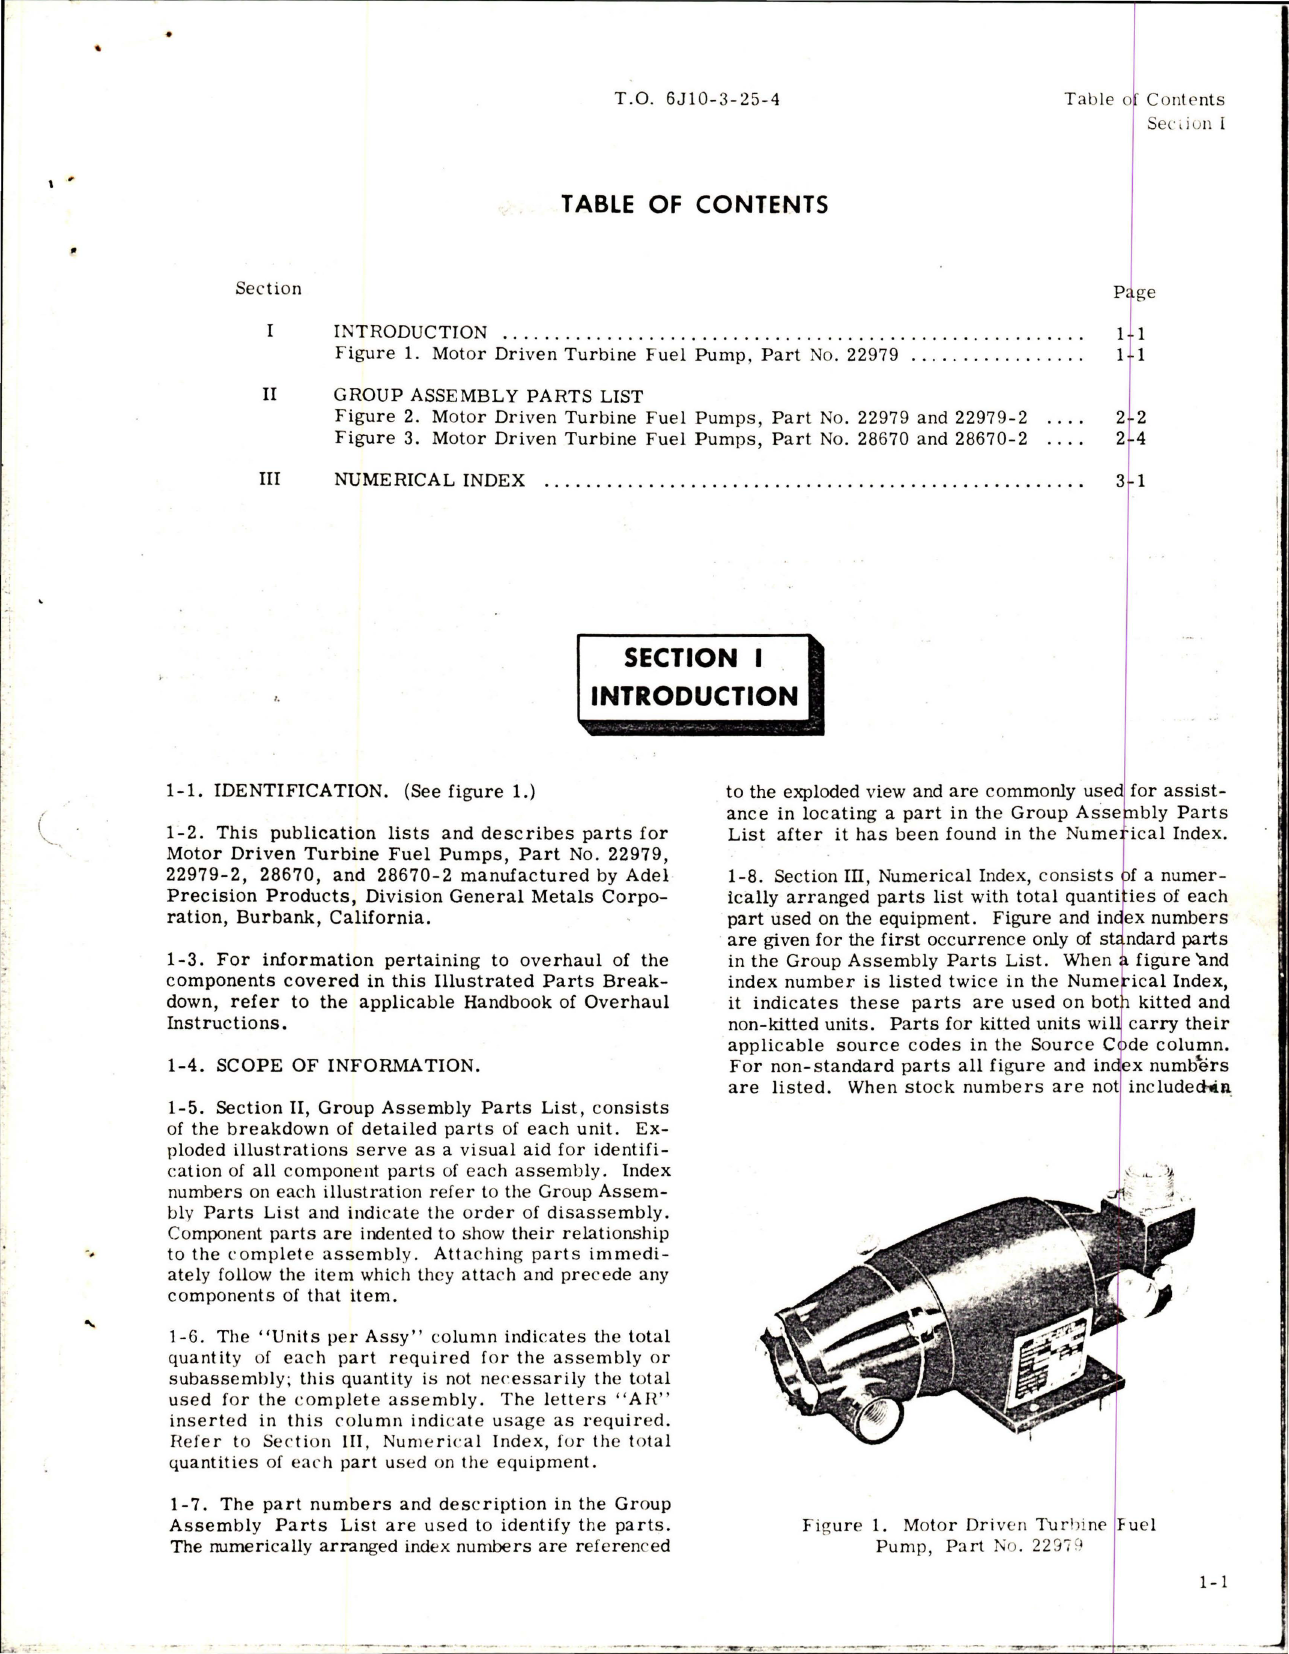 Sample page 5 from AirCorps Library document: Illustrated Parts Breakdown for Motor Driven Turbine Fuel Pump